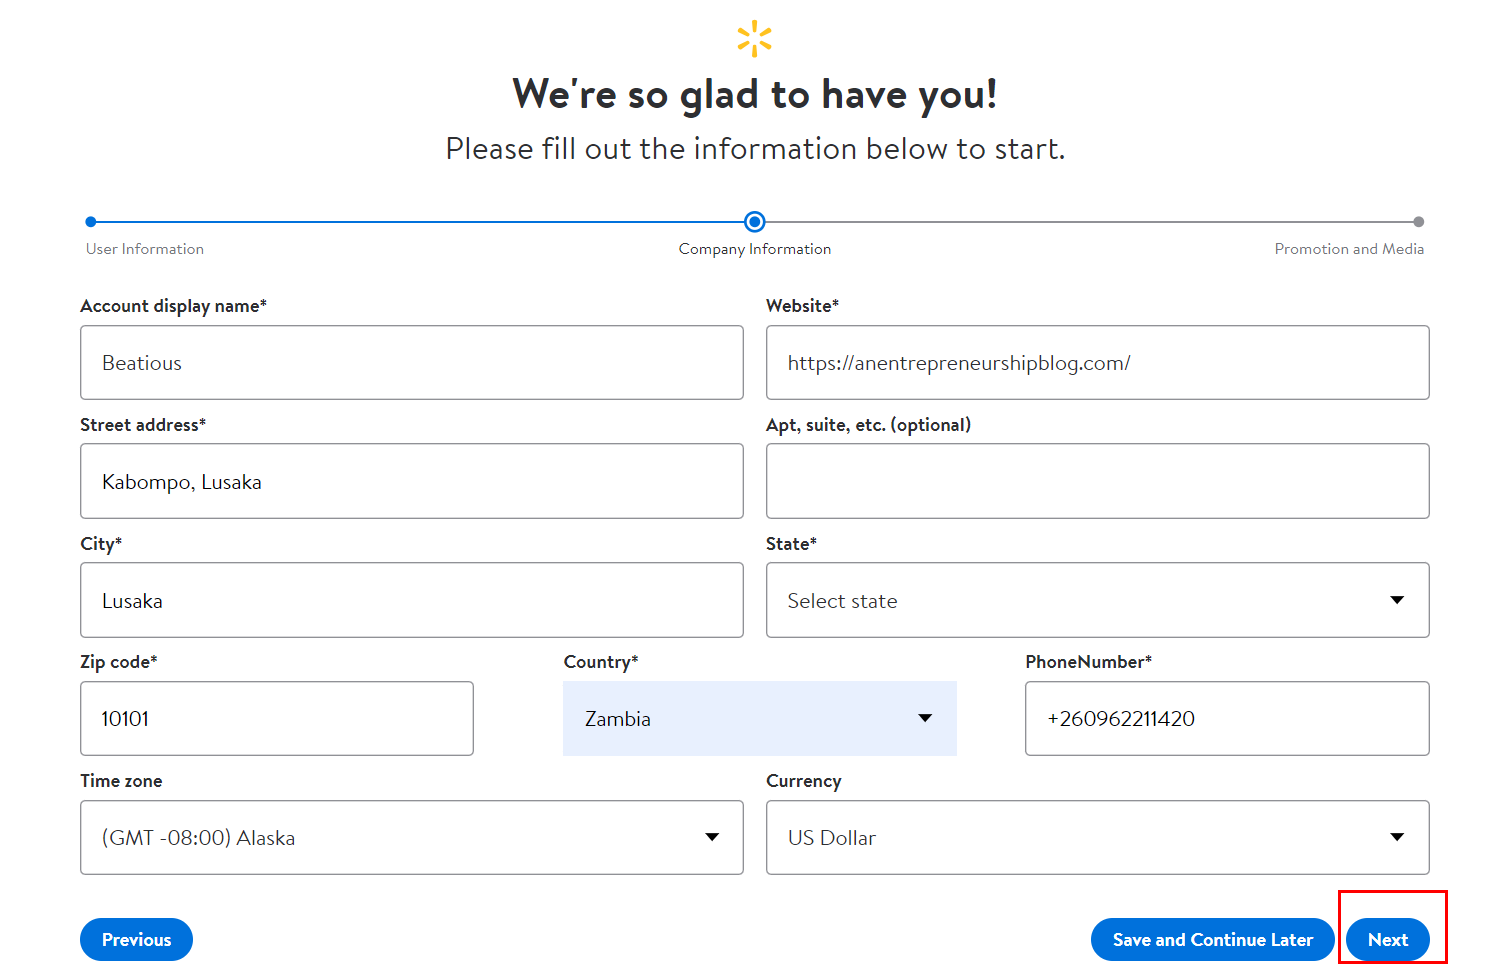 Walmart - account creation page for company  information submission